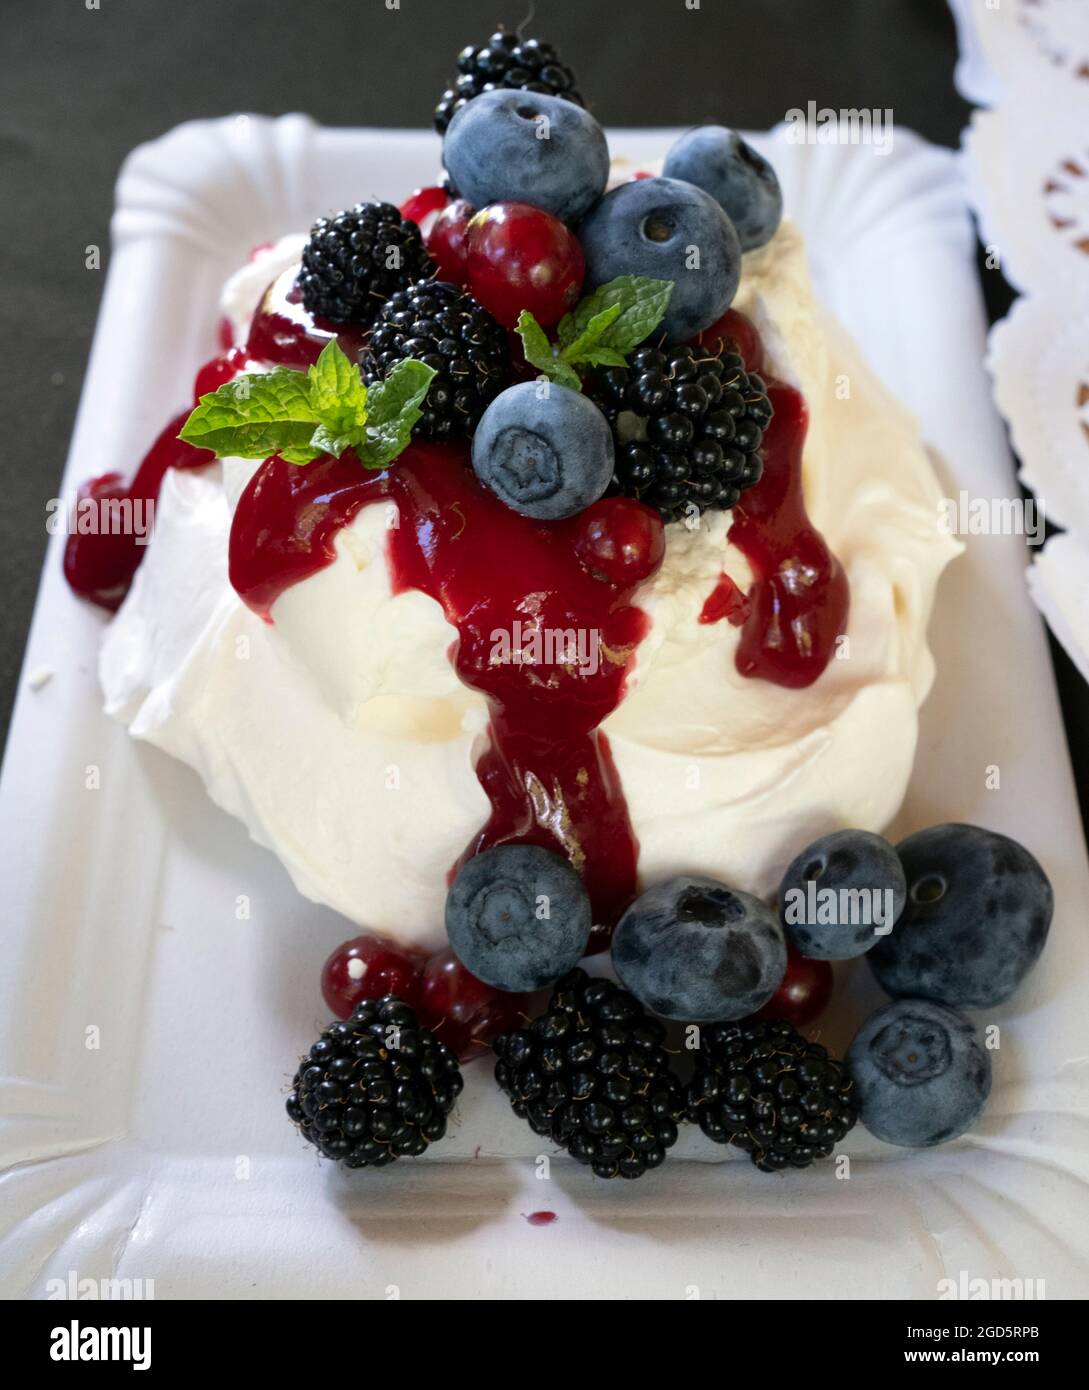 The Home Cafe “Tie jau tikai pumpuriņi” sweet offering a set of  whipped cream, blueberries and caneberries in Sigulda city, Latvia Stock Photo